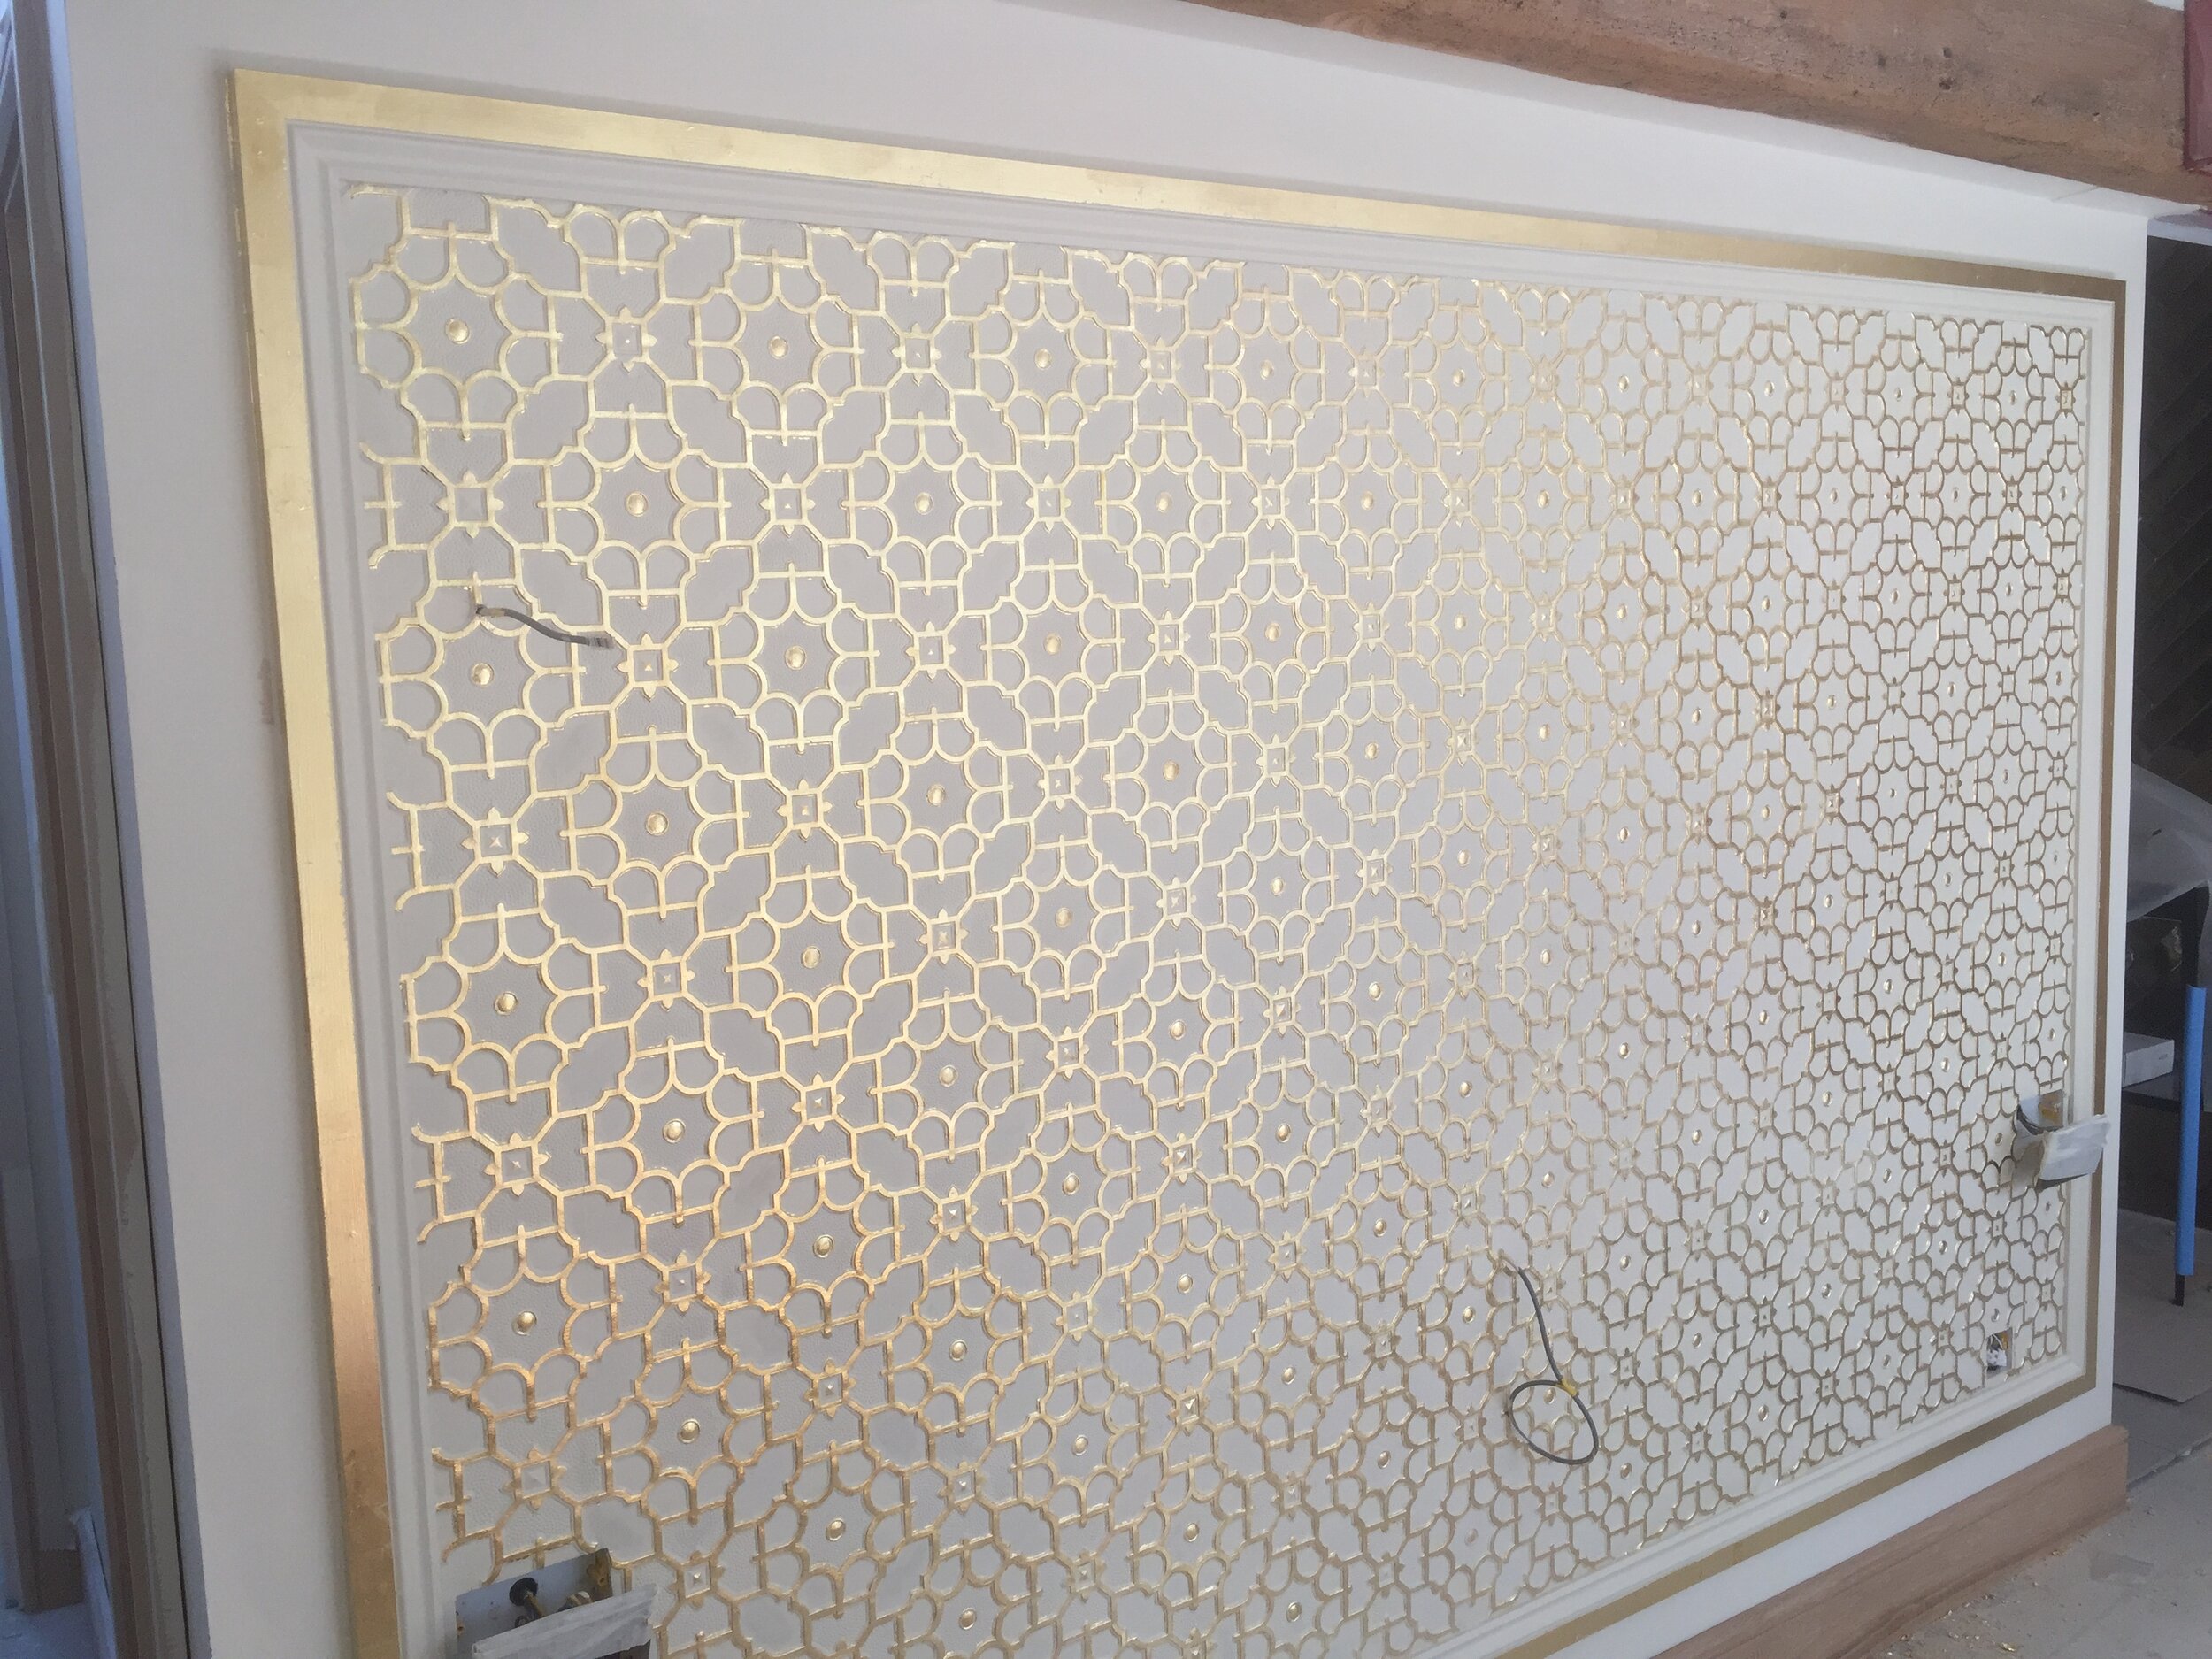 Bespoke Lincrusta Feature Headboard  with Gilded Gold Highlights by Frank Holmes Ltd, Lancashire